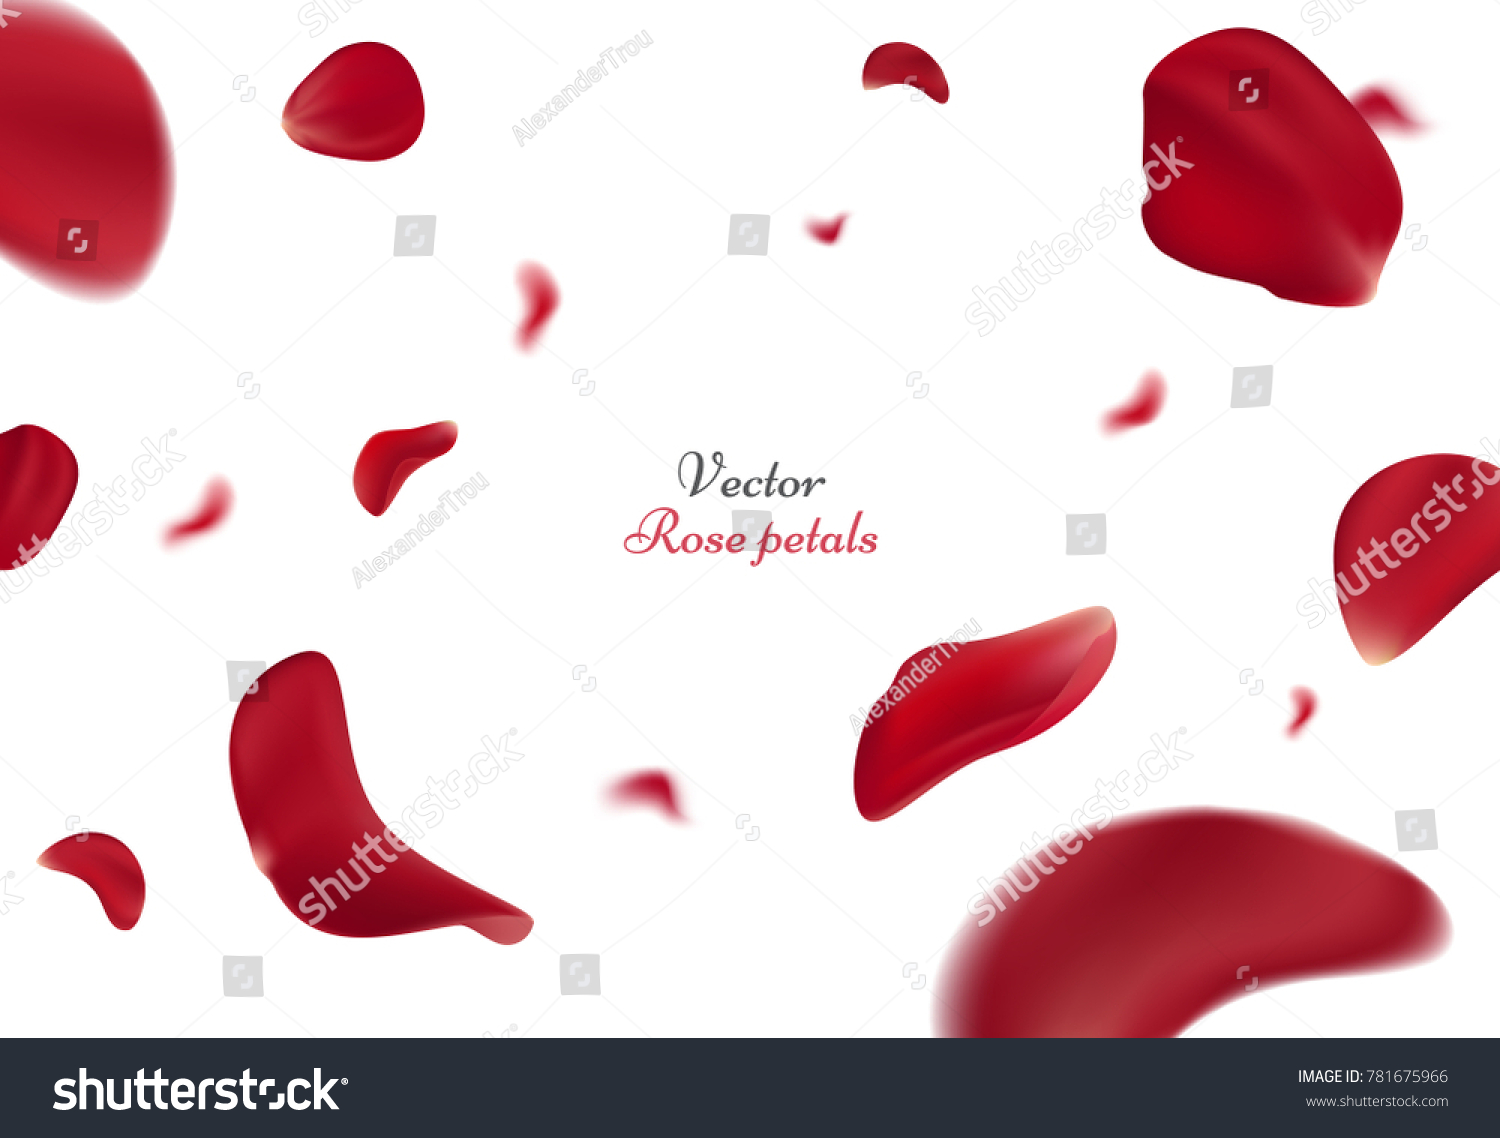 Falling red rose petals isolated on white background. Vector illustration with beauty roses petal, applicable for design of greeting cards on March 8 and St. Valentine's Day. Eps 10